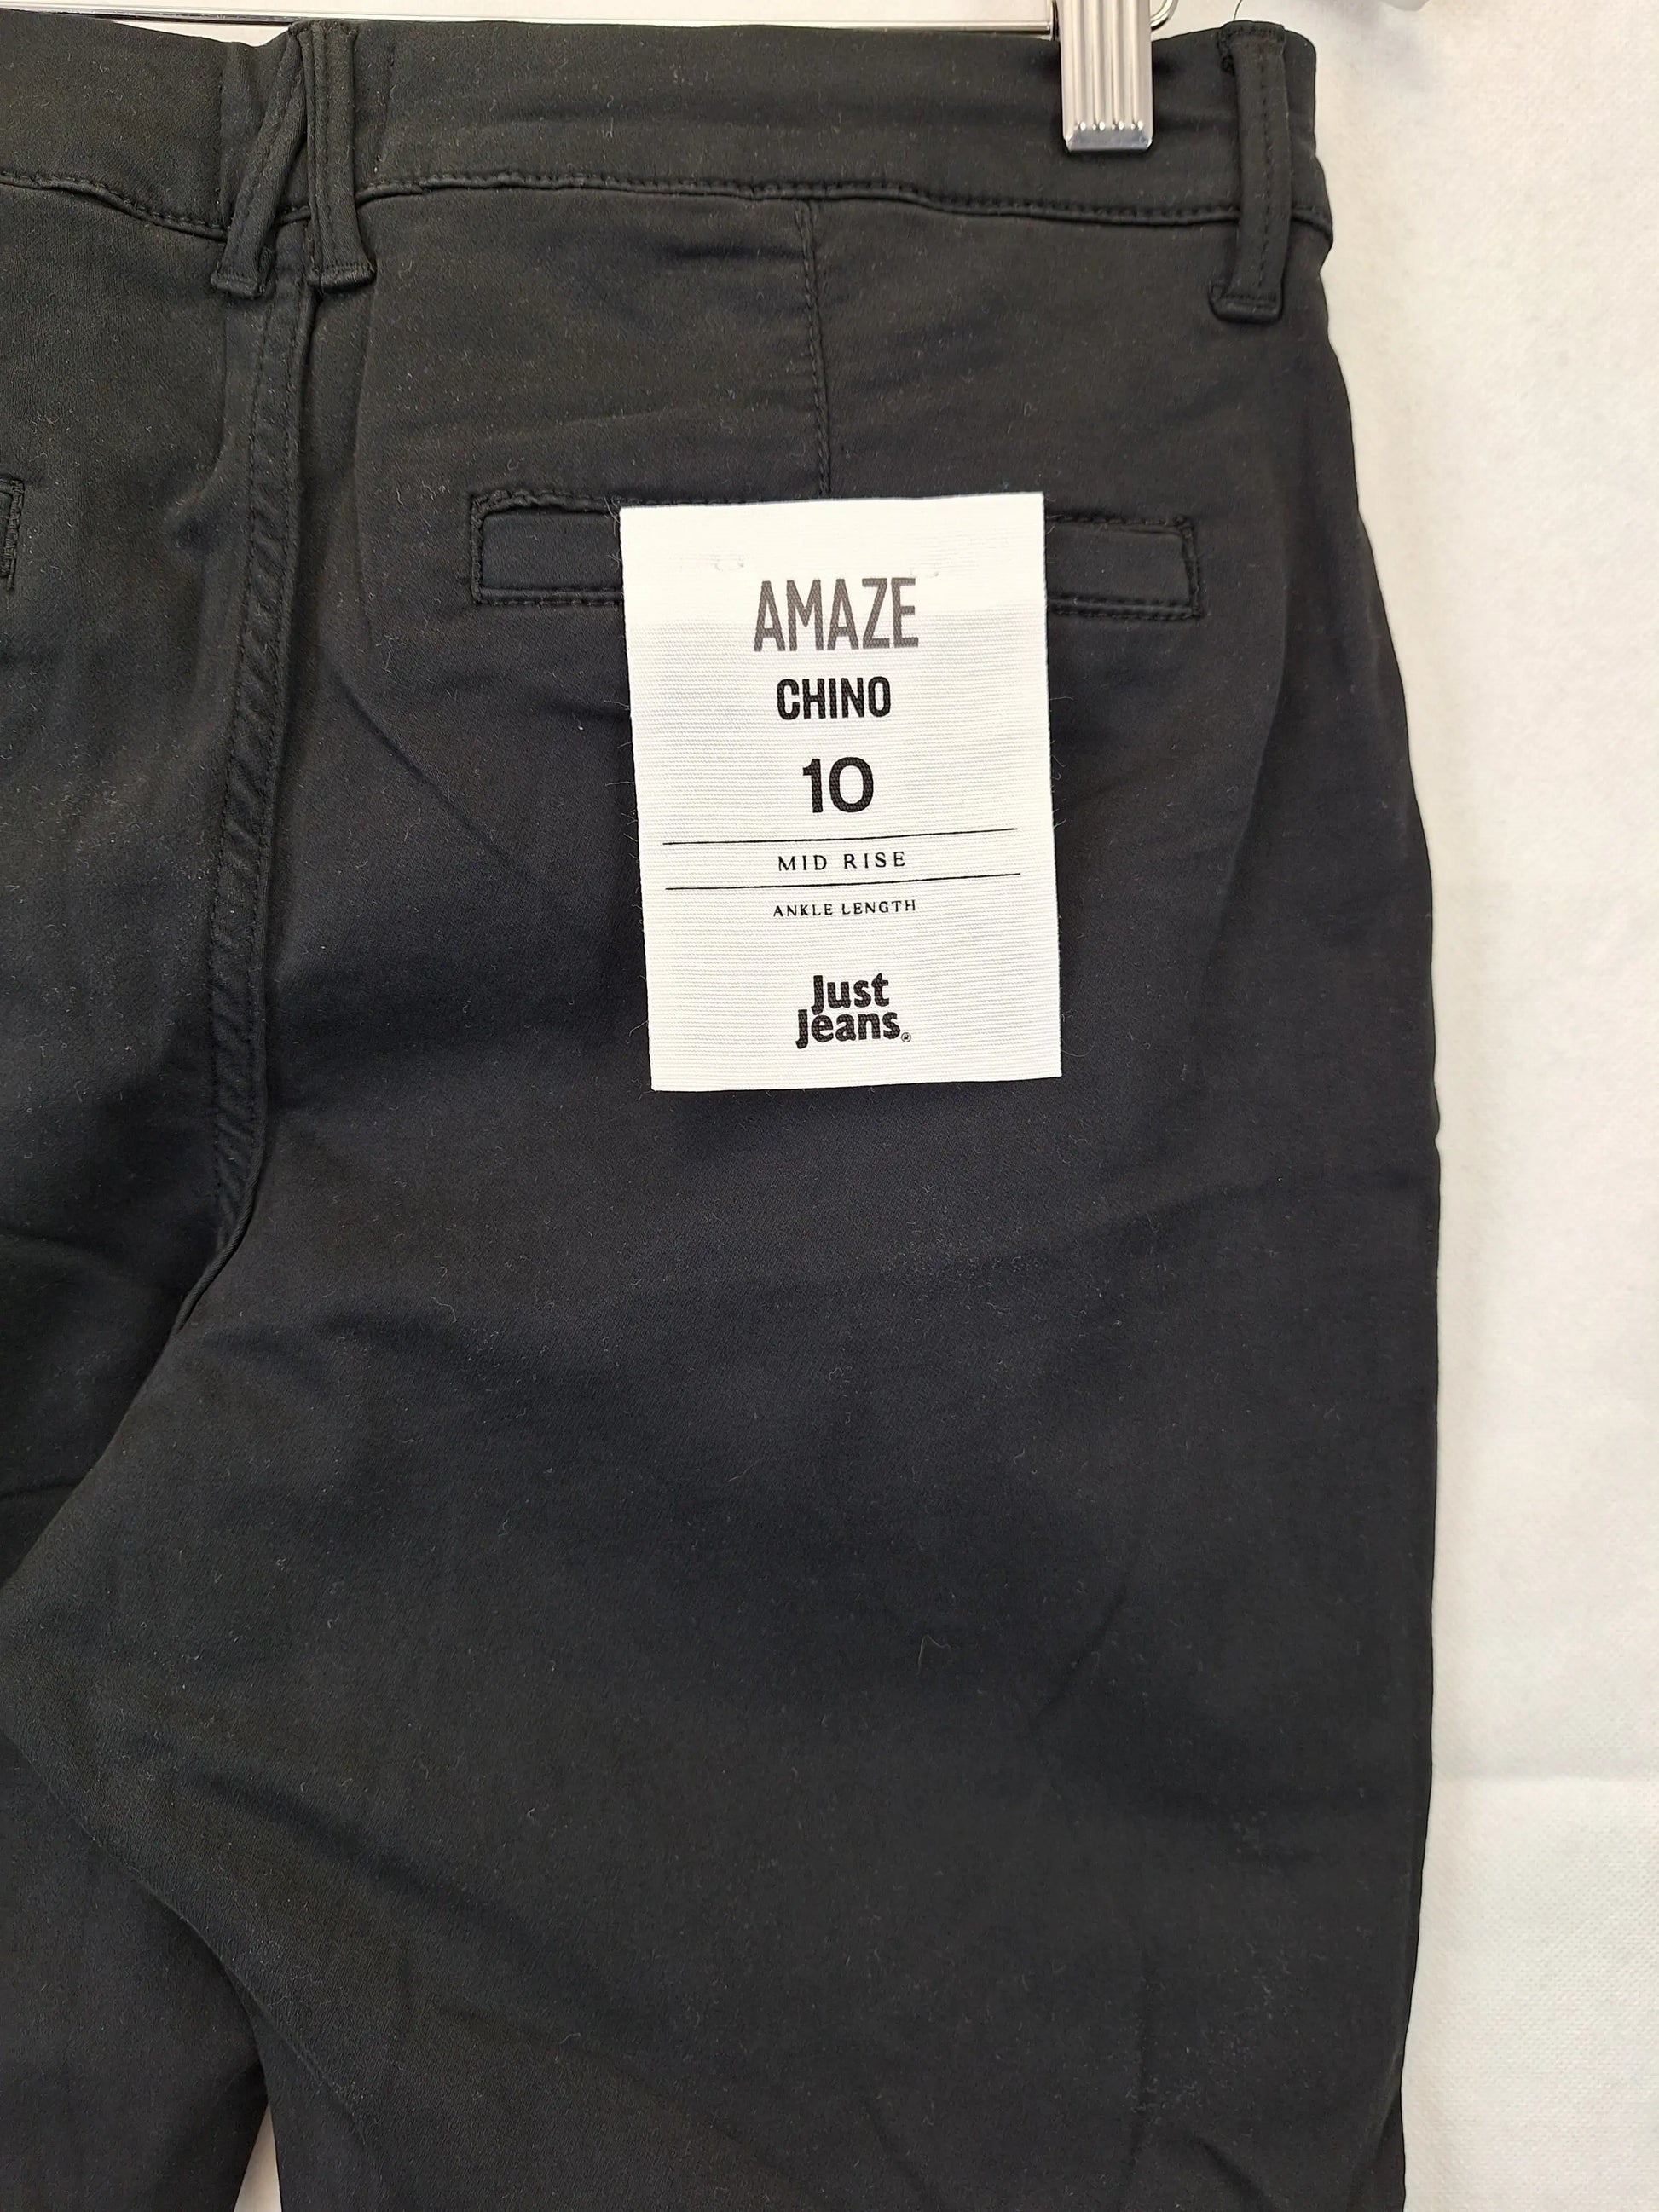 Just Jeans Chino Mid Rise Ankle Length Denim Jeans Size 10 – SwapUp